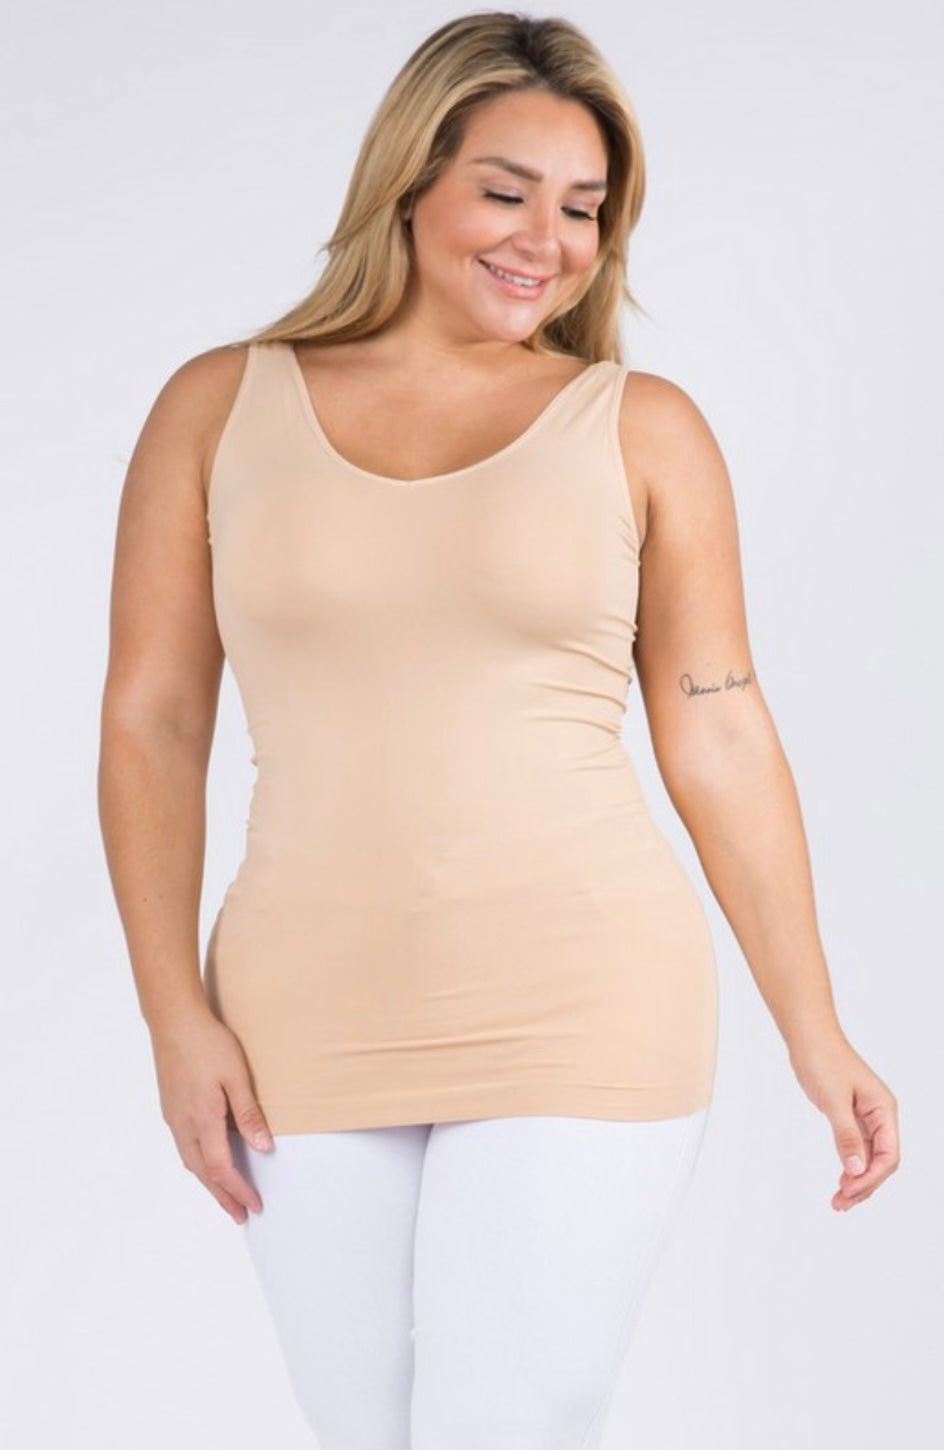 Curvy One Size Reversible Seamless Tanks